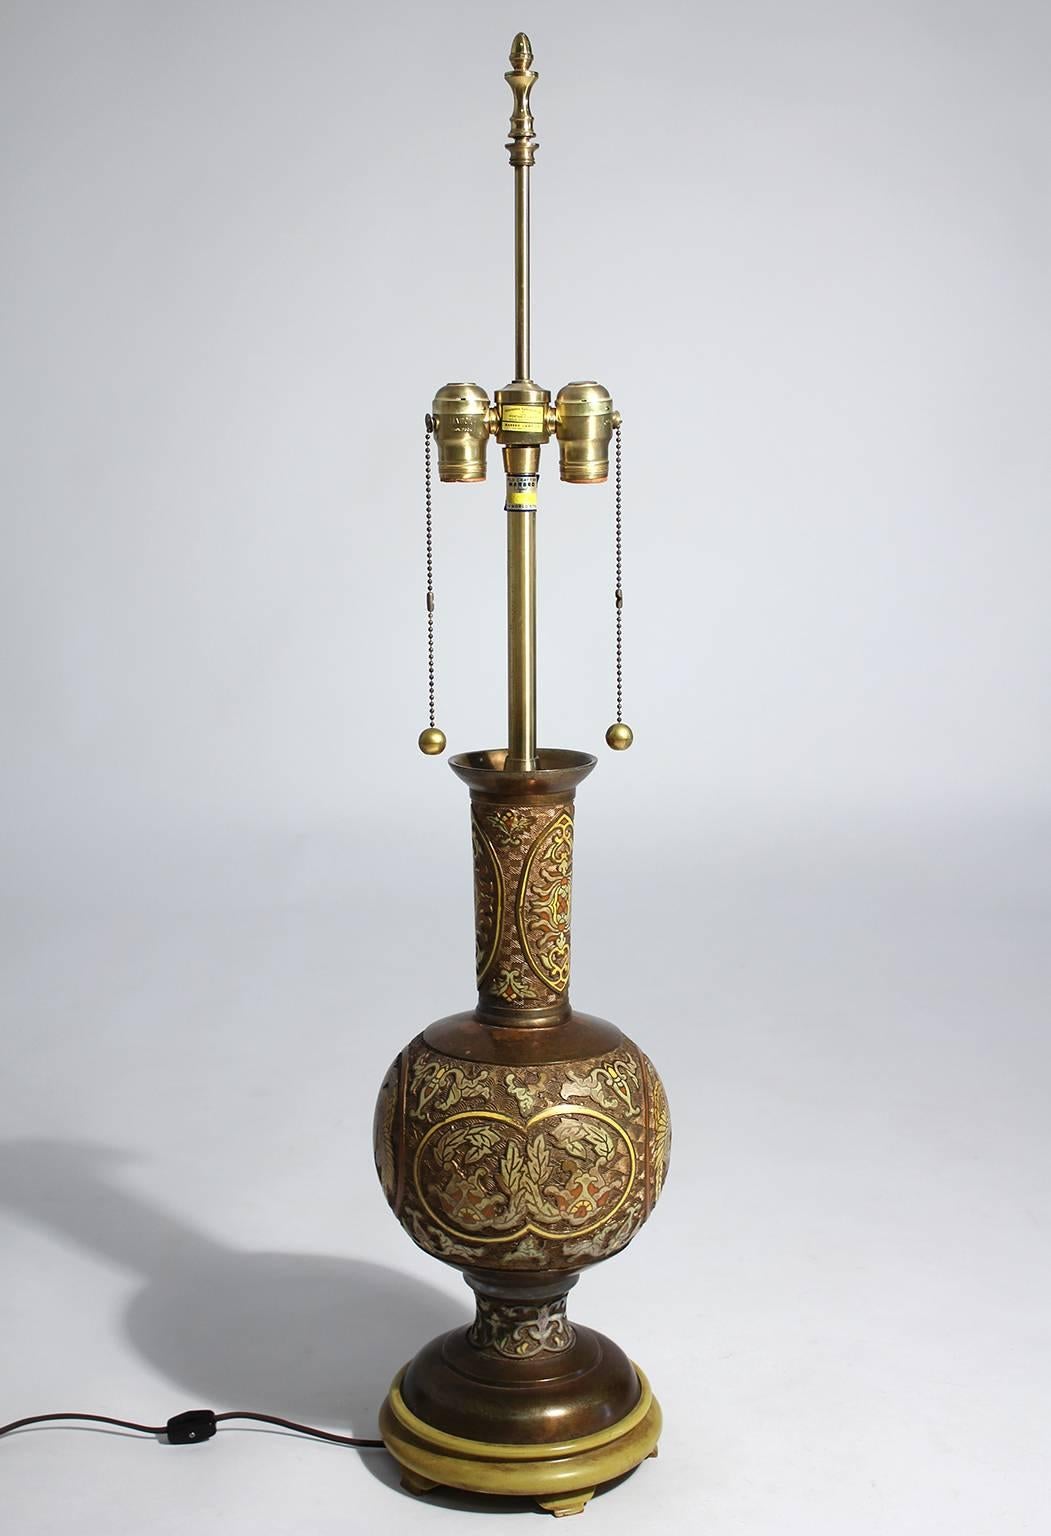 Chinese bronze with cloisonne enamel table lamp with wonderful patina by The Marbro Lamp Company, Los Angeles.